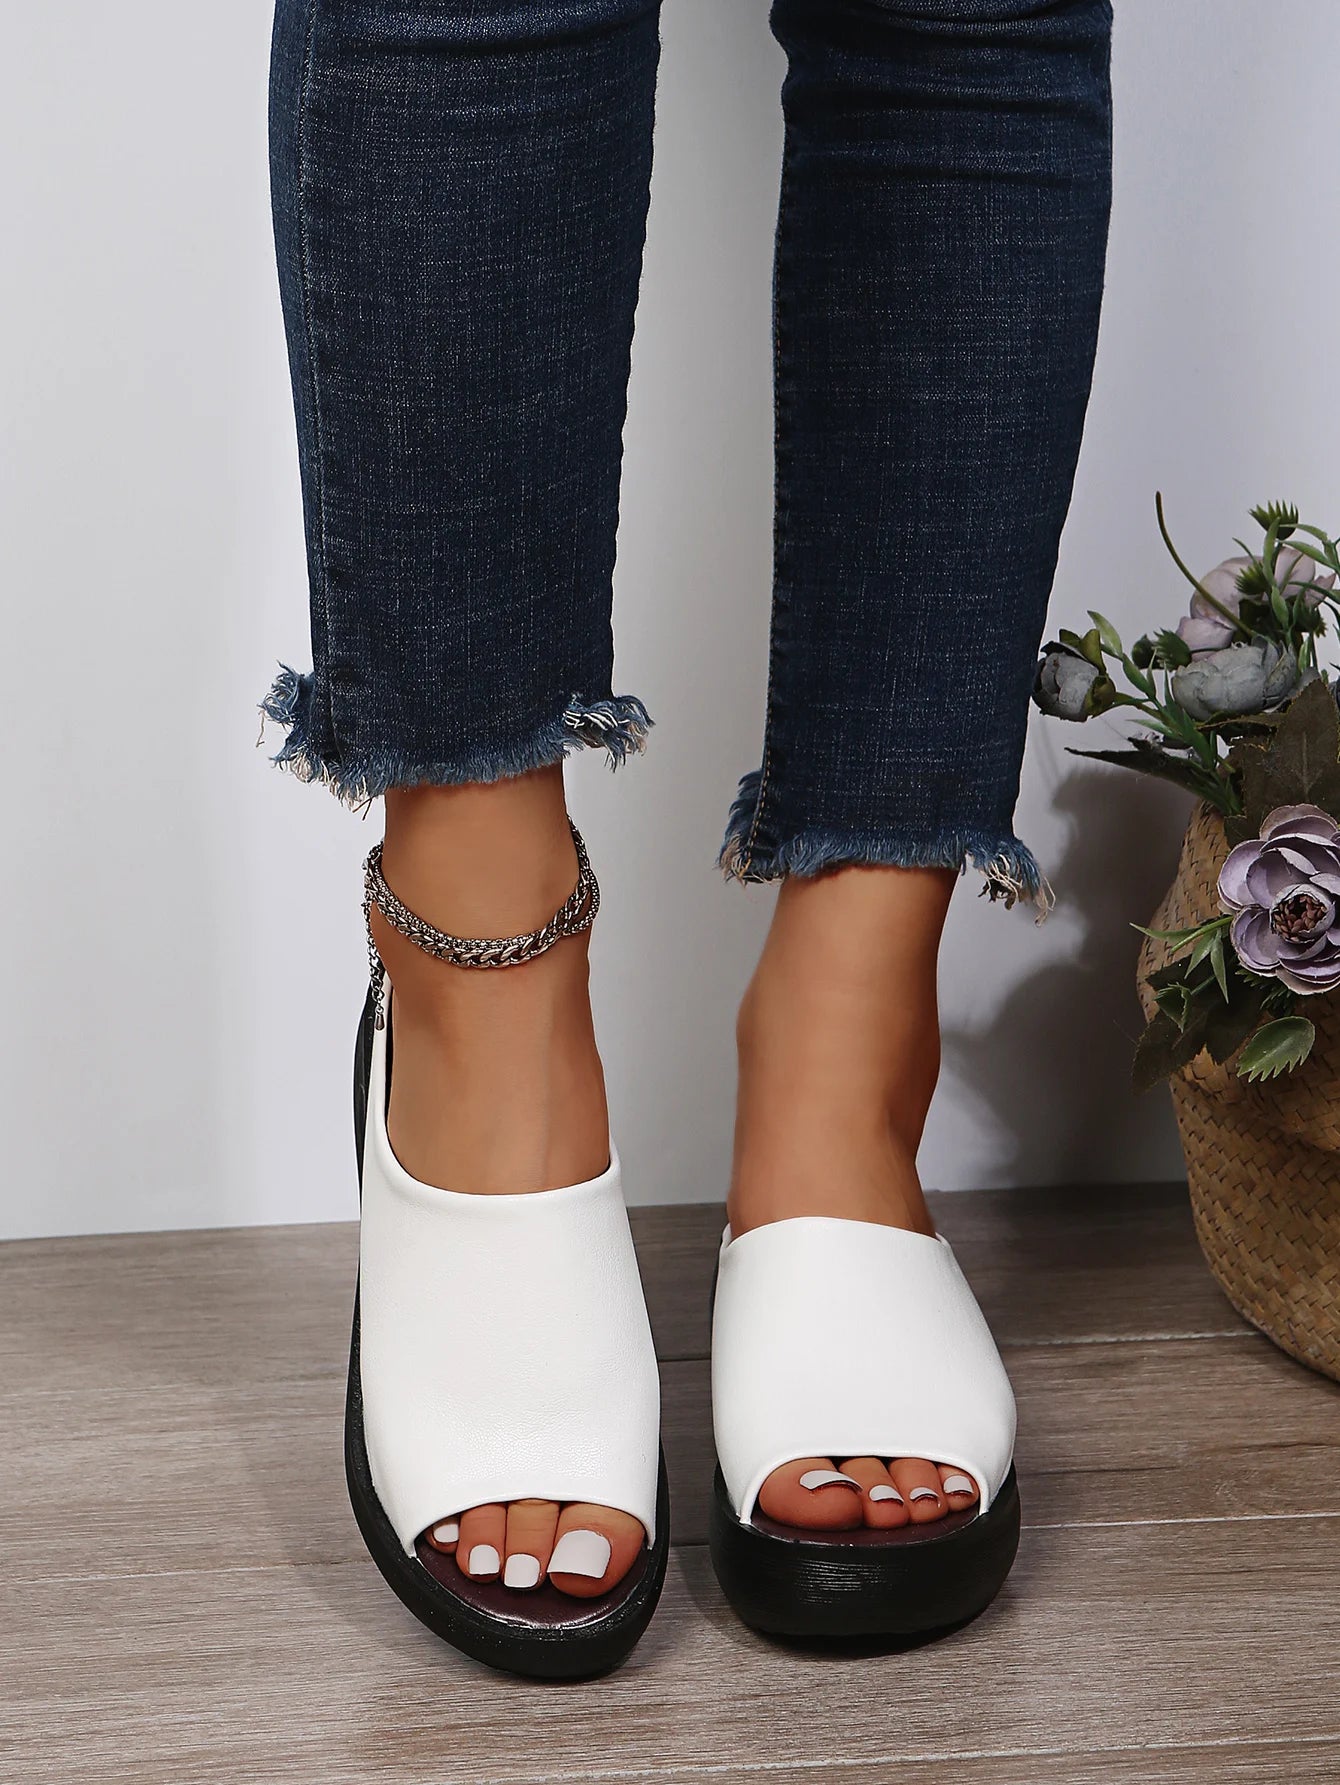 summer sandals, ankle strap sandals, ankle strap flats, trendy outfit for women, cute sandals, women casual shoes for sale Florida, Prolyf online clothing store, cute church outfit for women Florida, ethnic style, fish mouth, thick bottom, wedges, comfortable, stylish, versatile